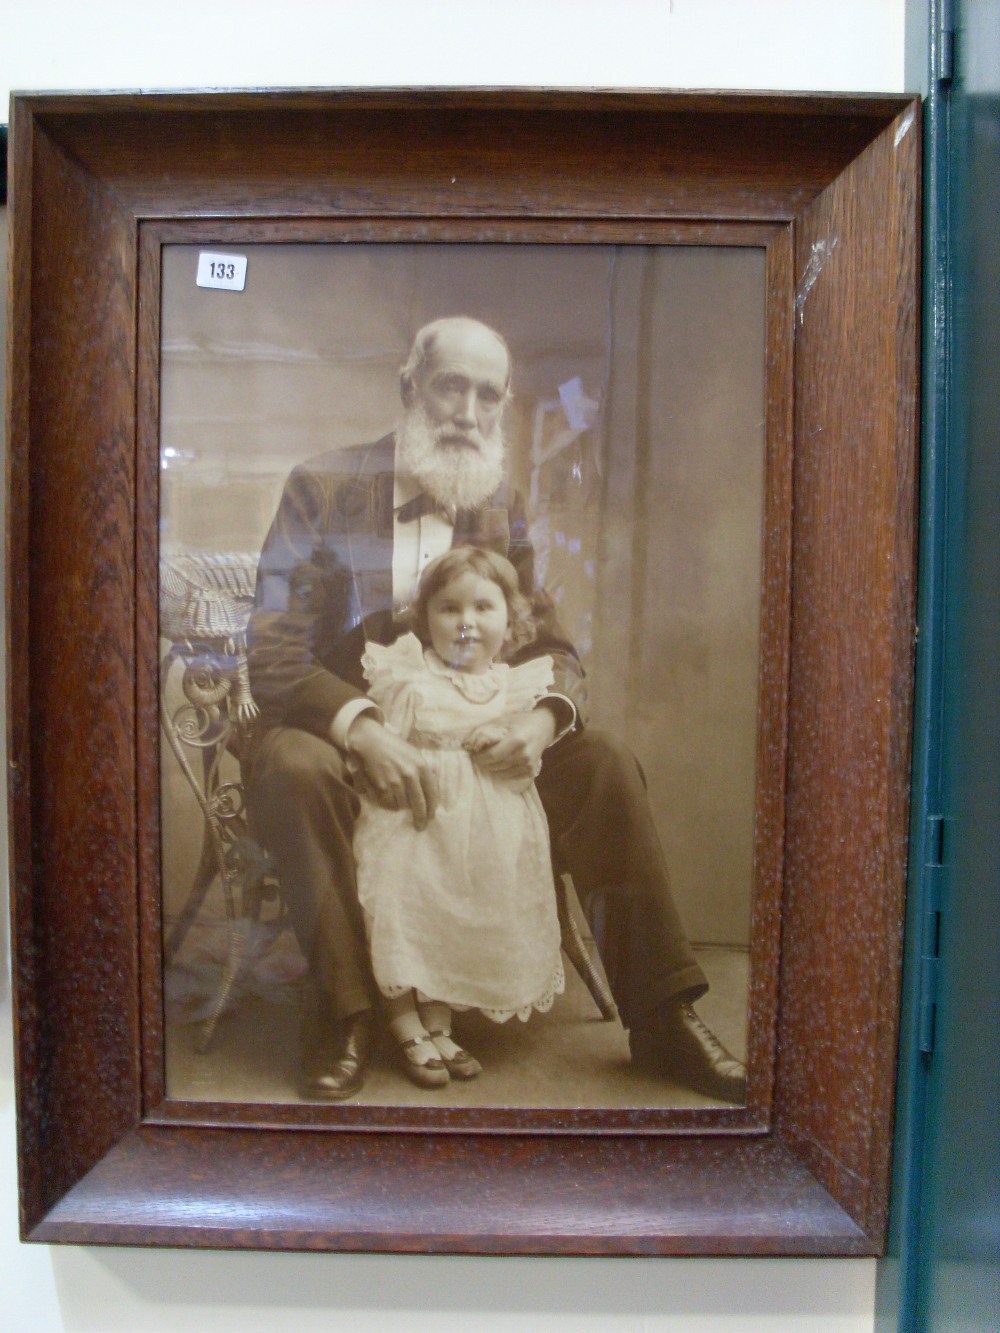 Victorian photograph of a gentleman and child by William J. Millrik of Paisley, 1899.